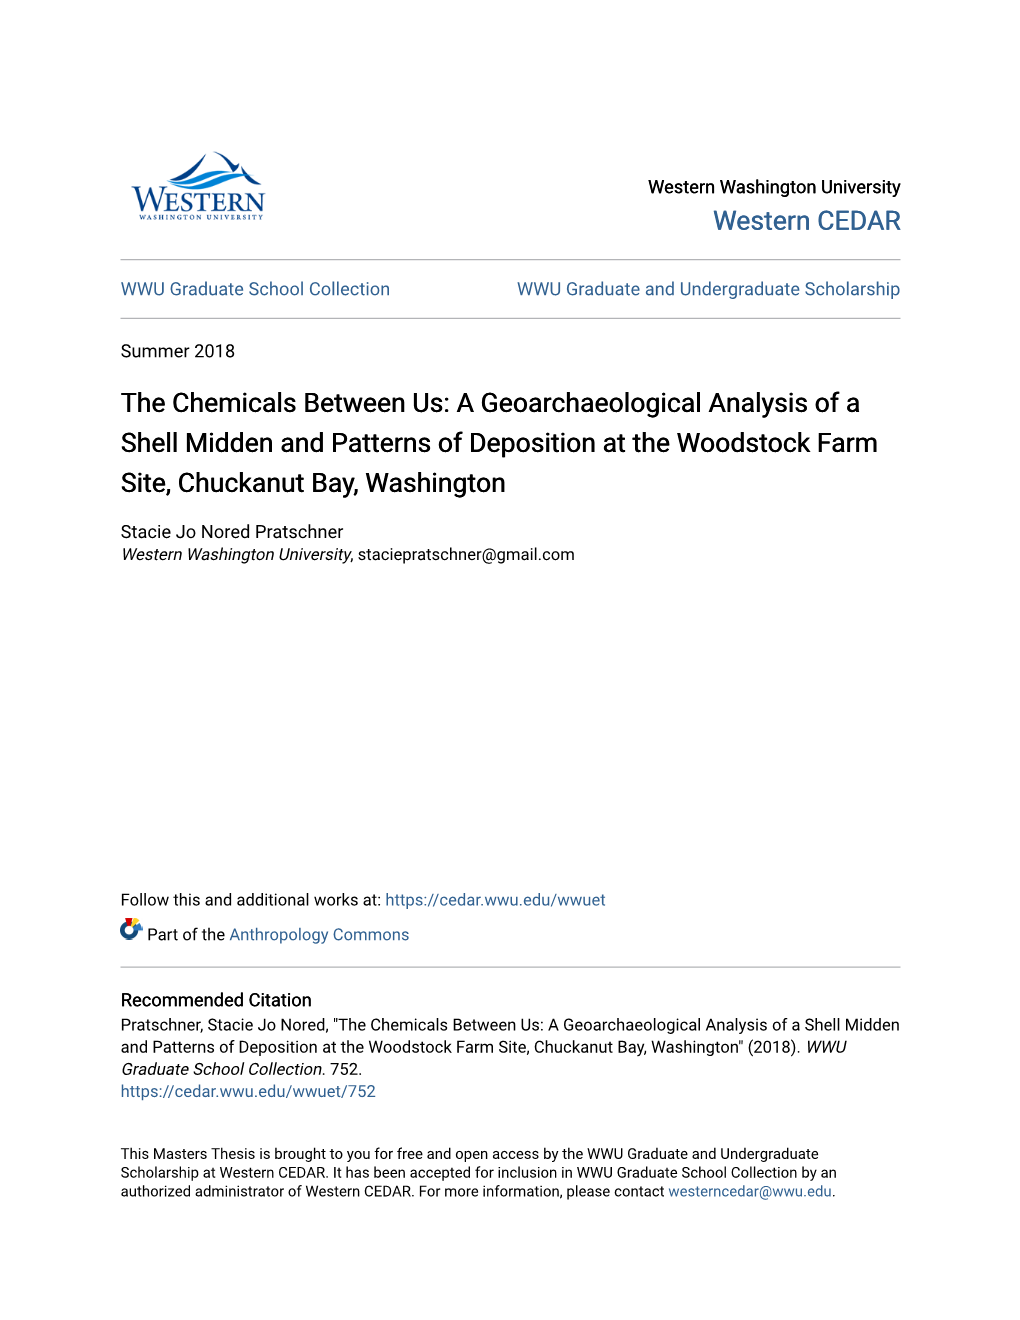 A Geoarchaeological Analysis of a Shell Midden and Patterns of Deposition at the Woodstock Farm Site, Chuckanut Bay, Washington